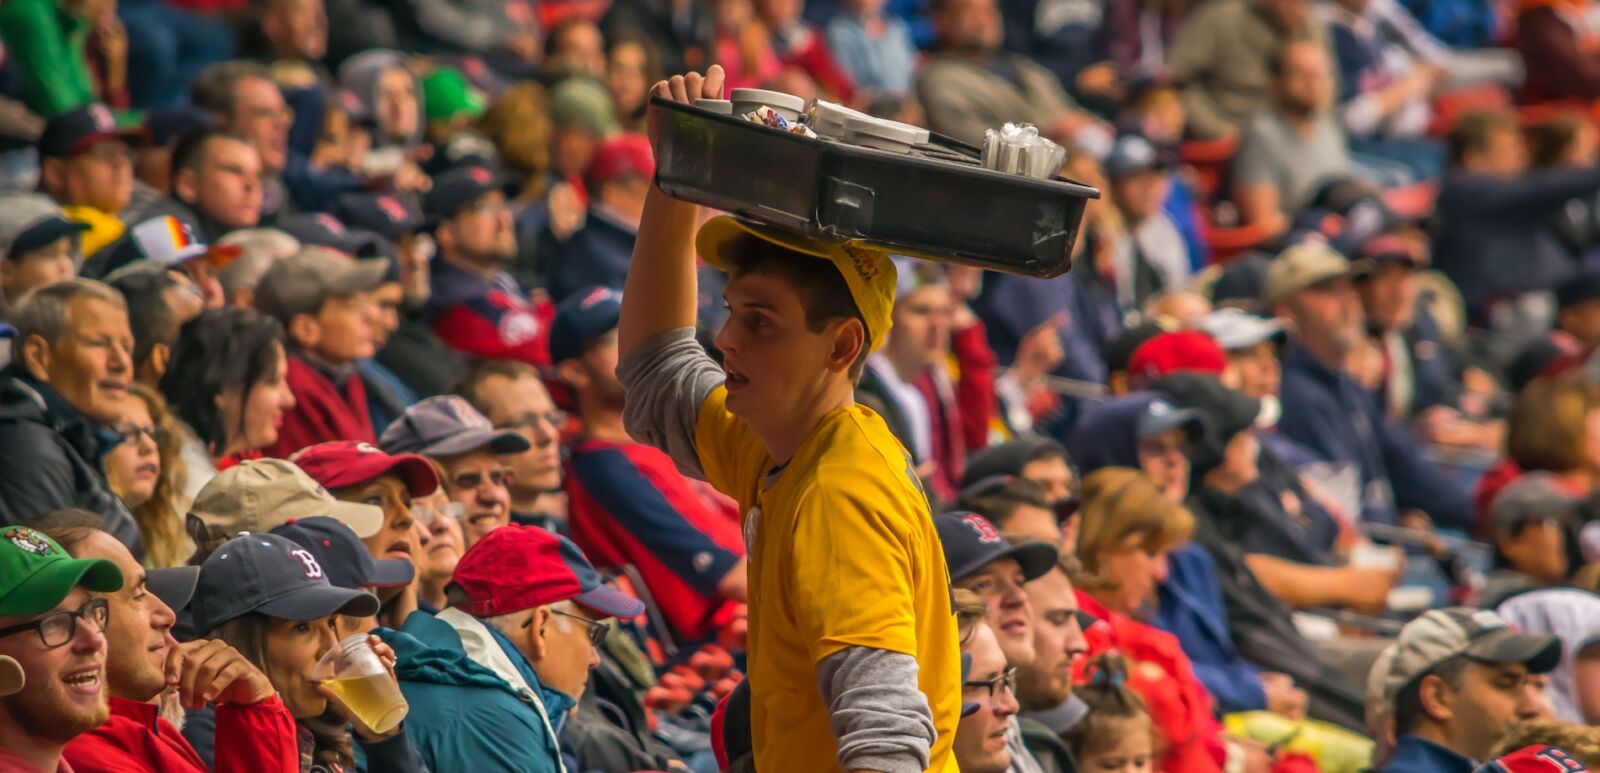 A Fenway Park vendor sells hot dogs to Boston Red Sox fans at a baseball game.